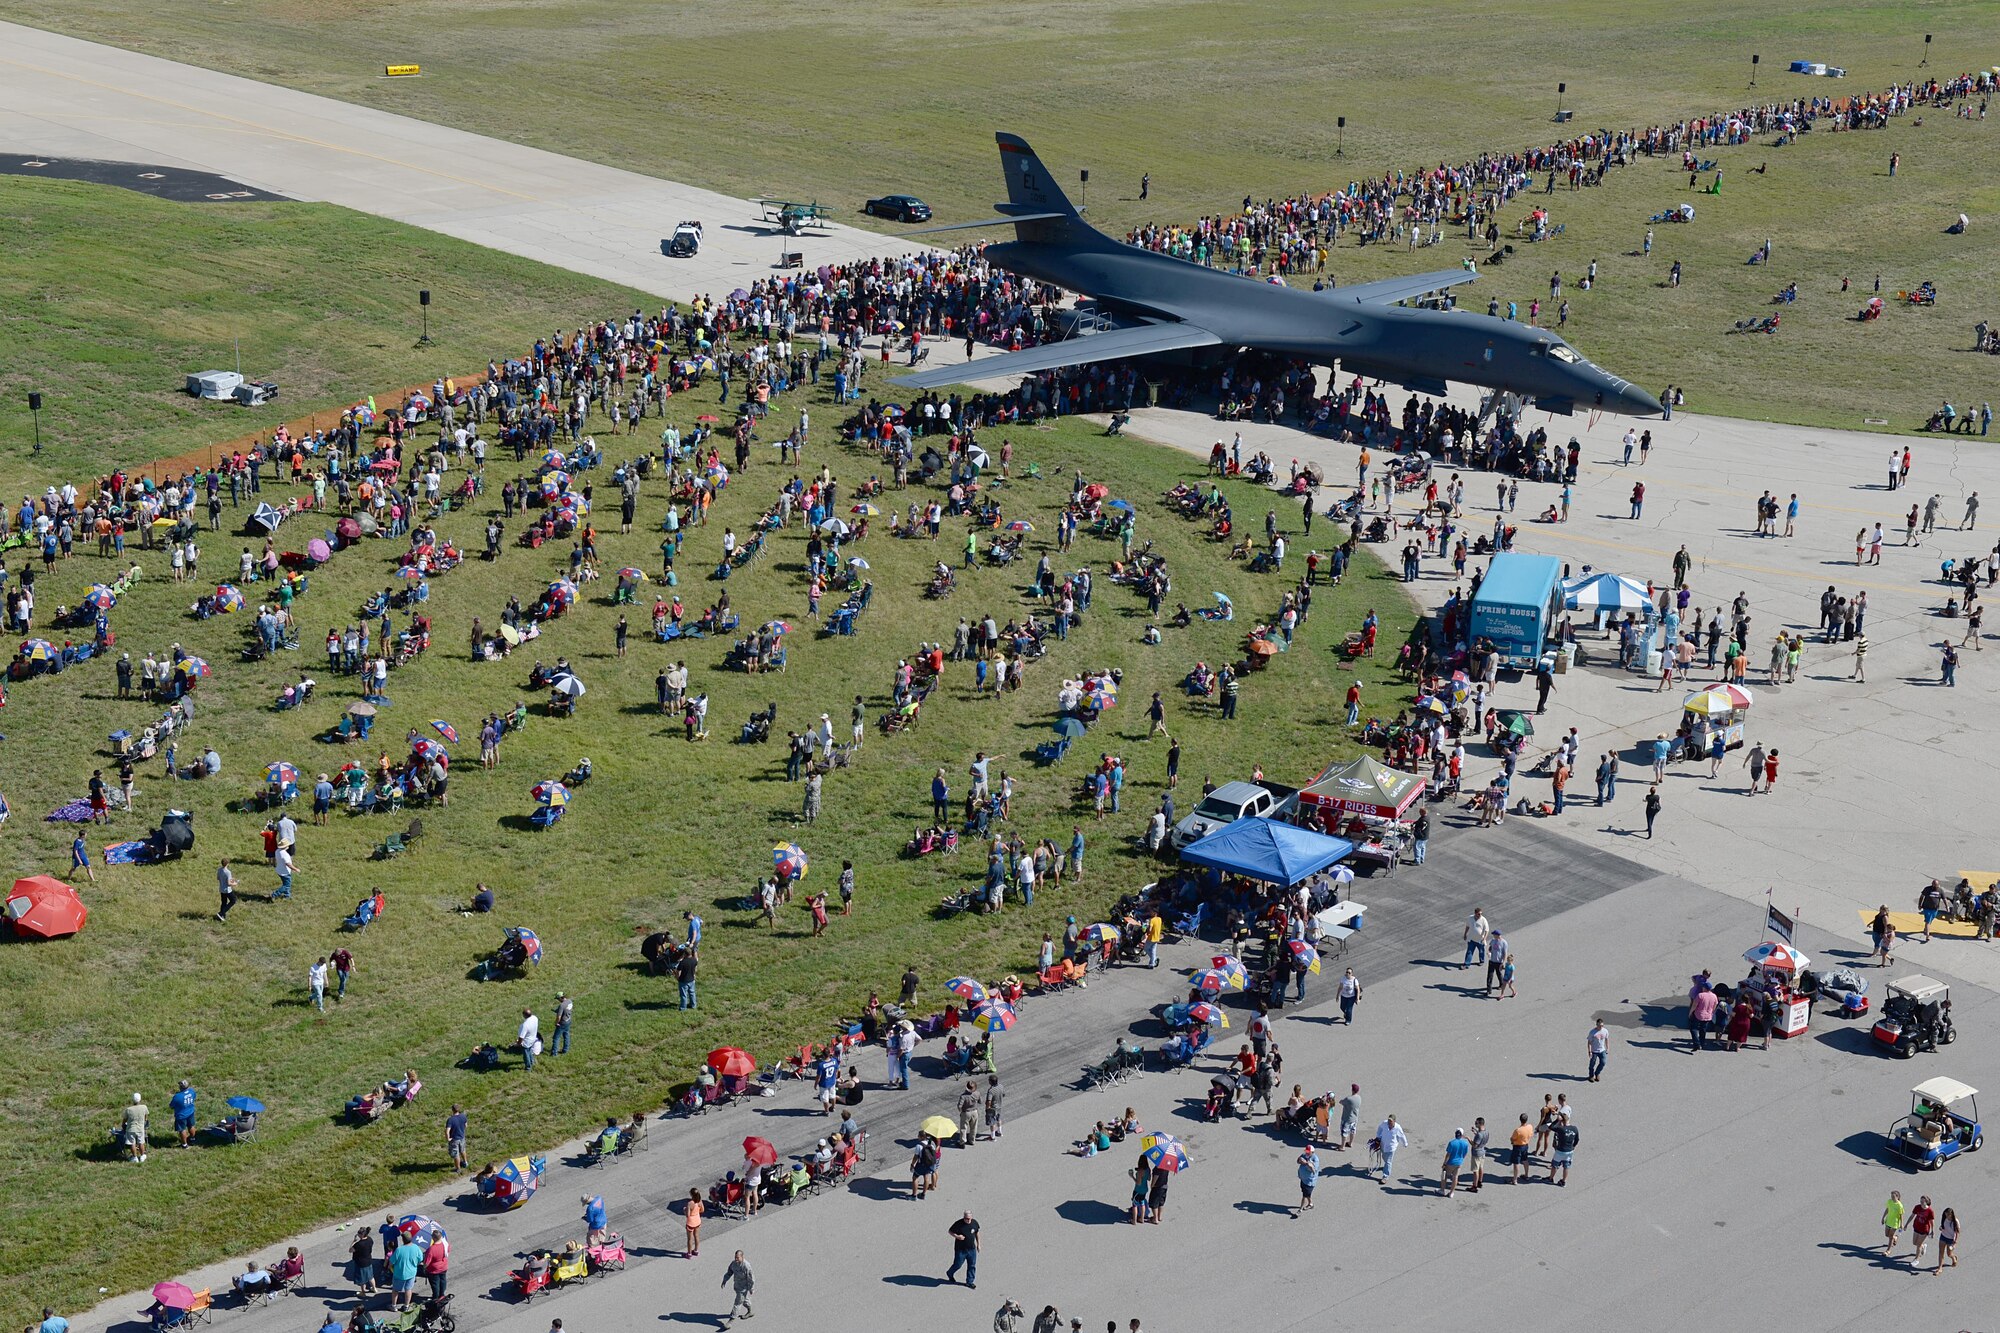 Thousands of people from Wichita Falls and neighboring communities attend the 75th Anniversary Open House and Air Show Celebration on Sheppard Air Force Base, Texas, Sept. 17, 2016. The celebration had numerous performers such as the Tora Tora Tora Pearl Harbor reenactment, the Air Force Wings of Blue, skydiver Dana Bowman, Viper Air Show jet car and solo demo, Randy Ball’s Mig 17 and Vietnam T-37 demo, Kent Pietsch Jelly Belly comedy air act, Texas Raiders B-17 WWII demo, Freedom Flyers P-51 WWII demo, and the world-famous U.S. Air Force Thunderbirds. (U.S. Air Force photo by Senior Airman Kyle E. Gese)